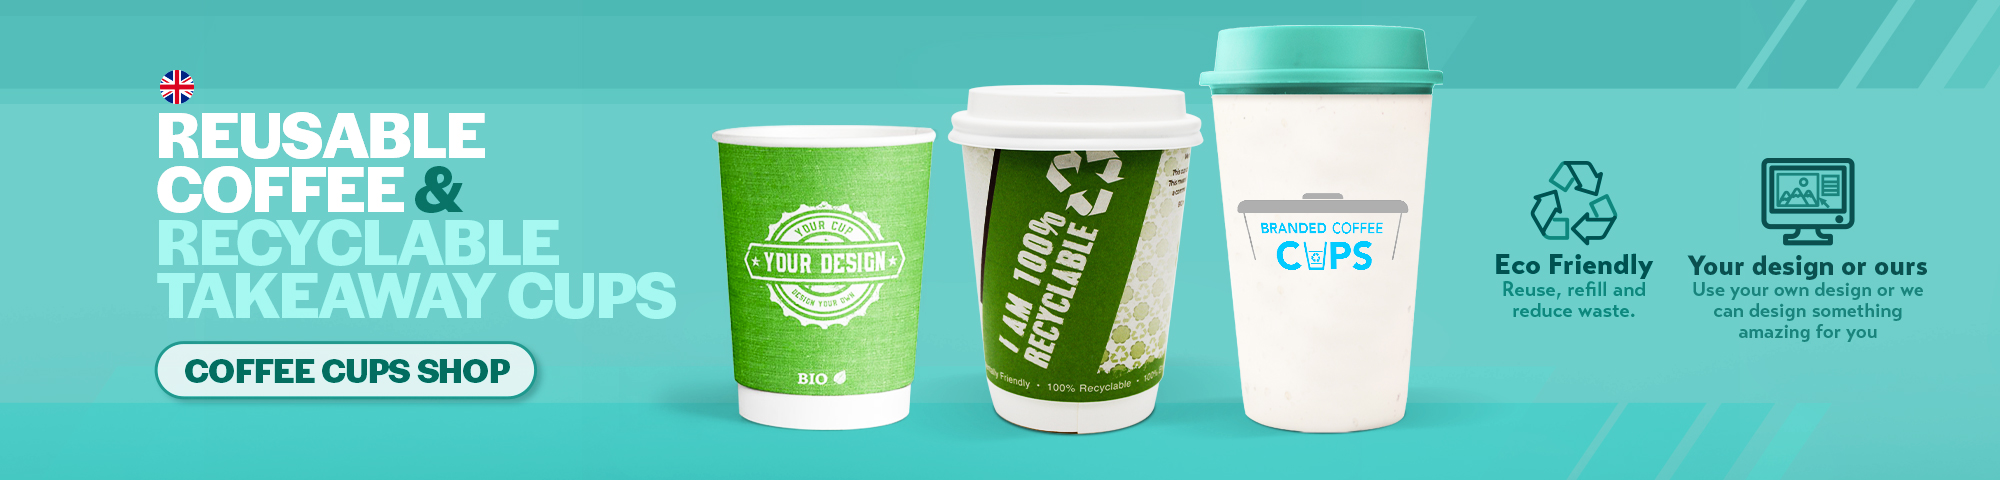 Reusable Coffee and Recyclable Takeaway Cups